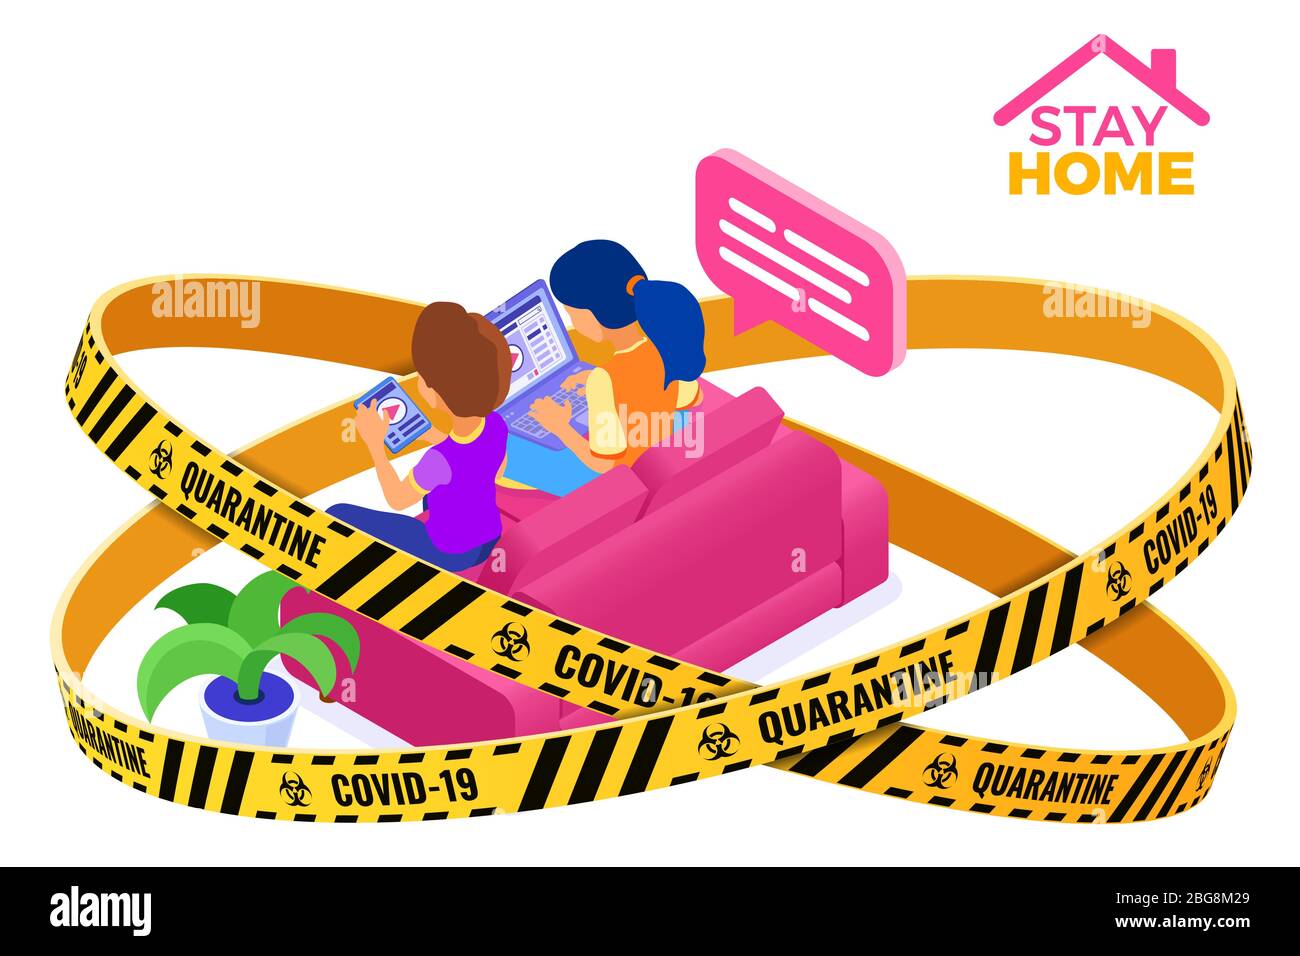 covid-19 quarantine stay home online education Stock Vector